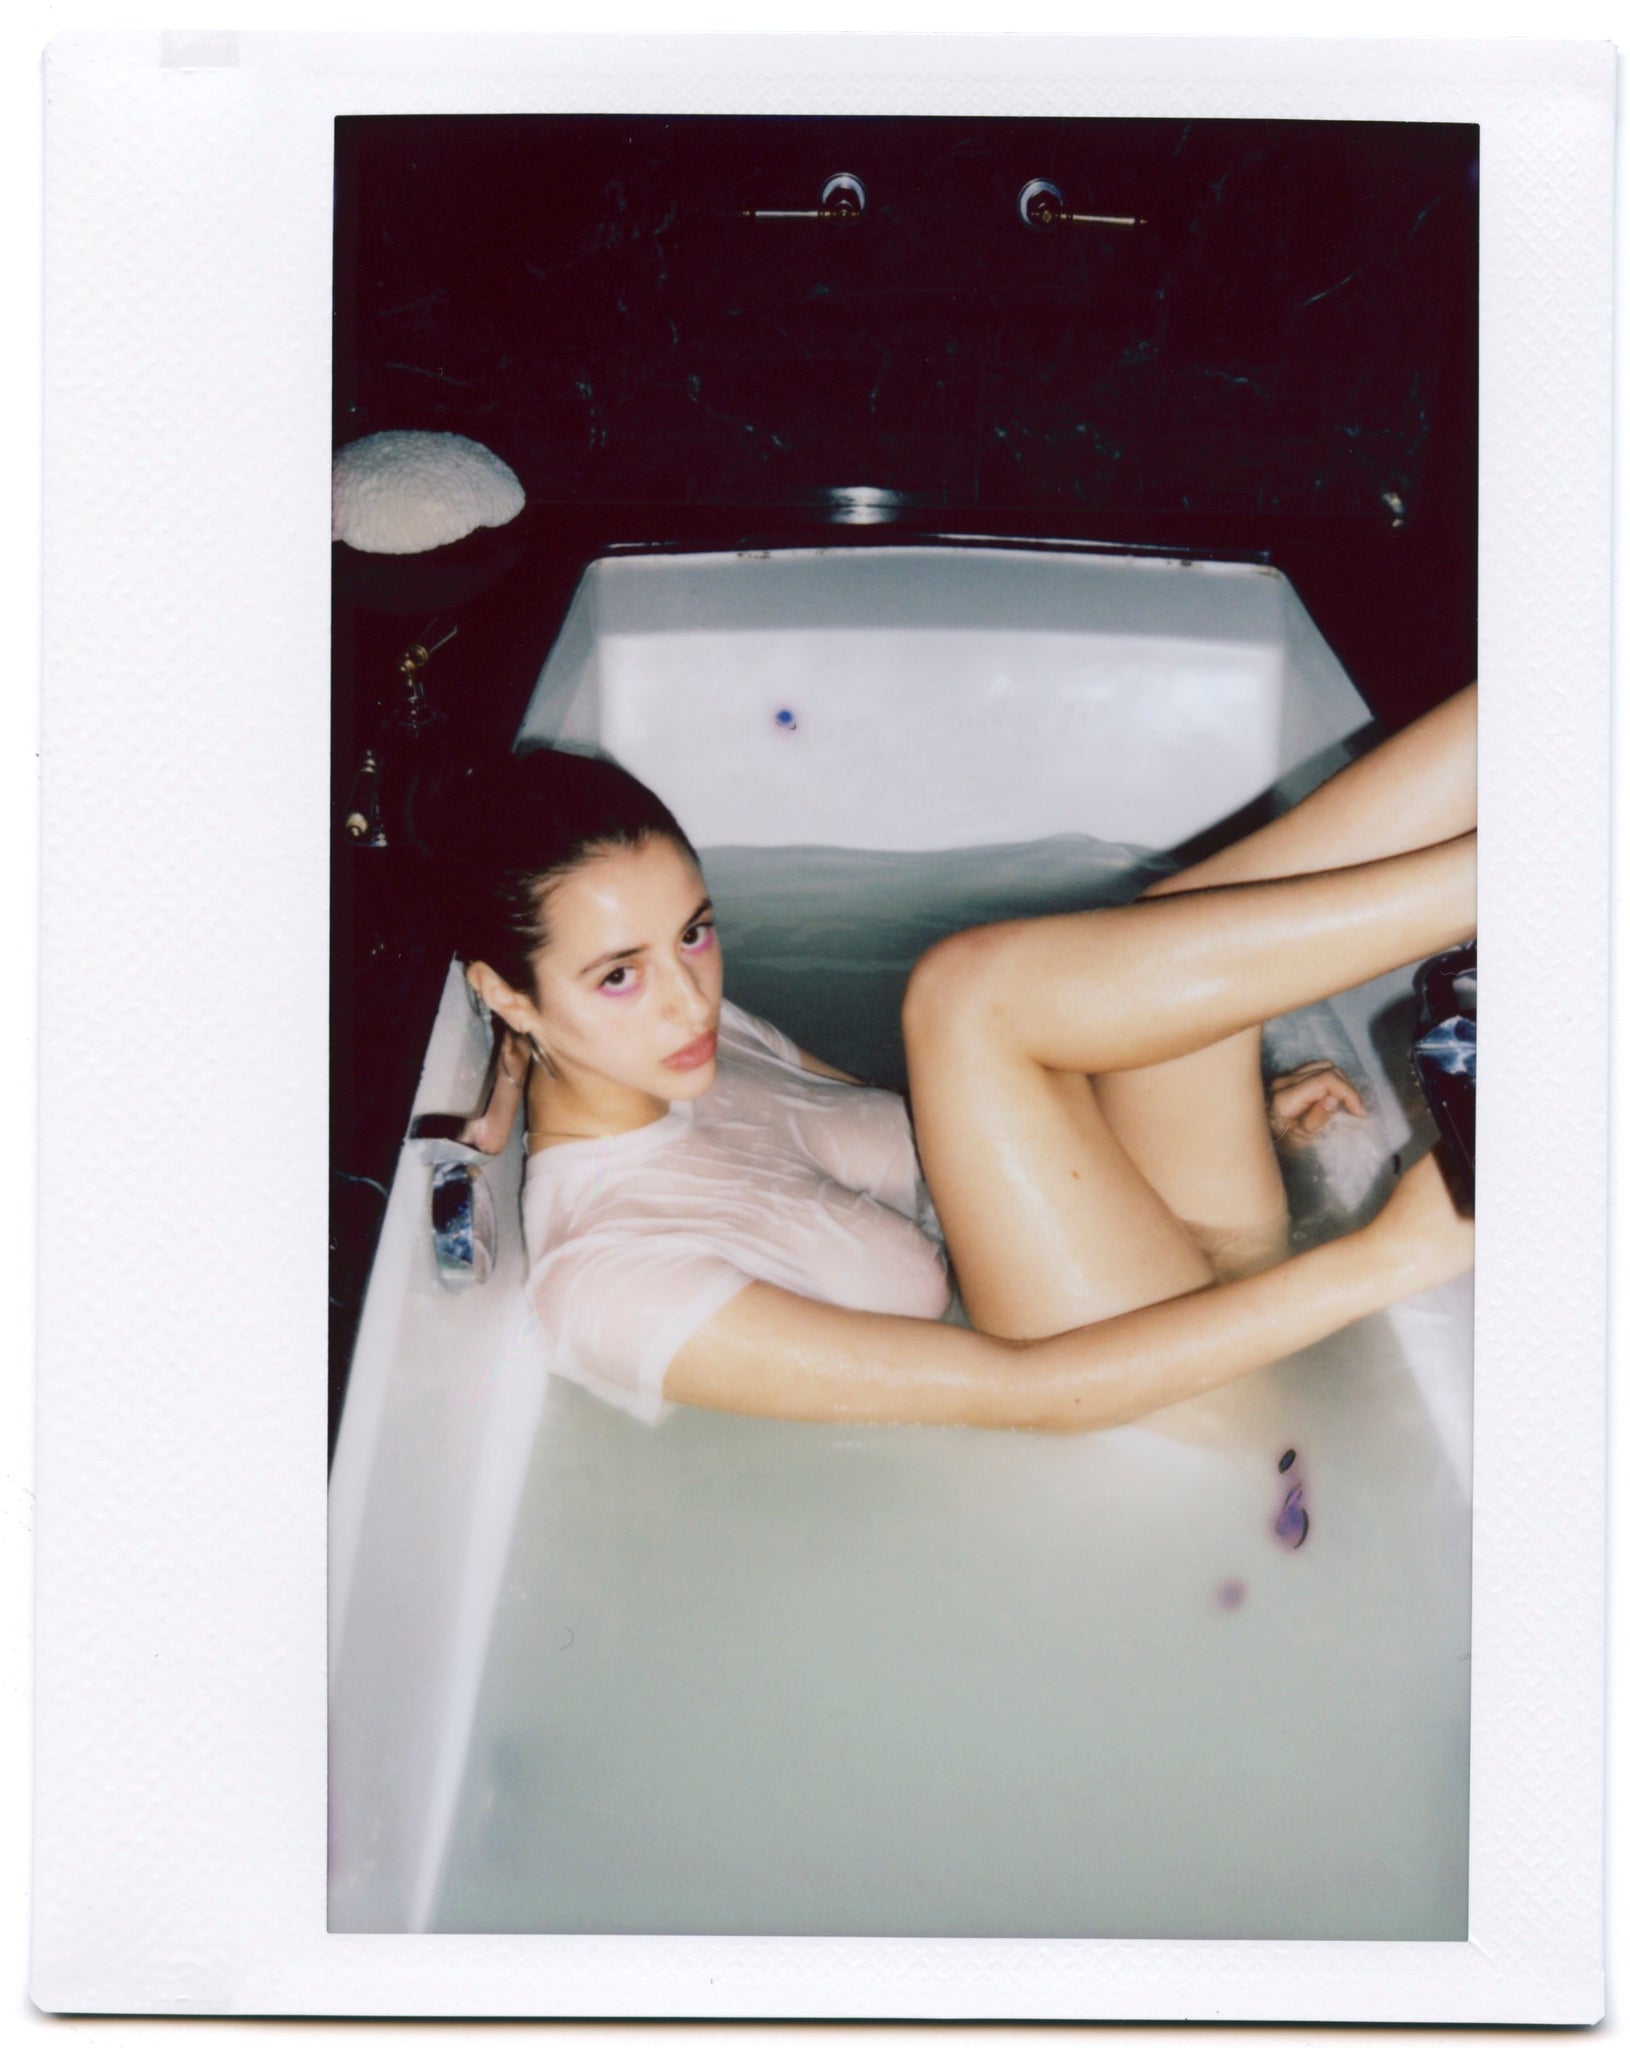 Moore Polaroids - Another Filthy Magazine - Photo 4